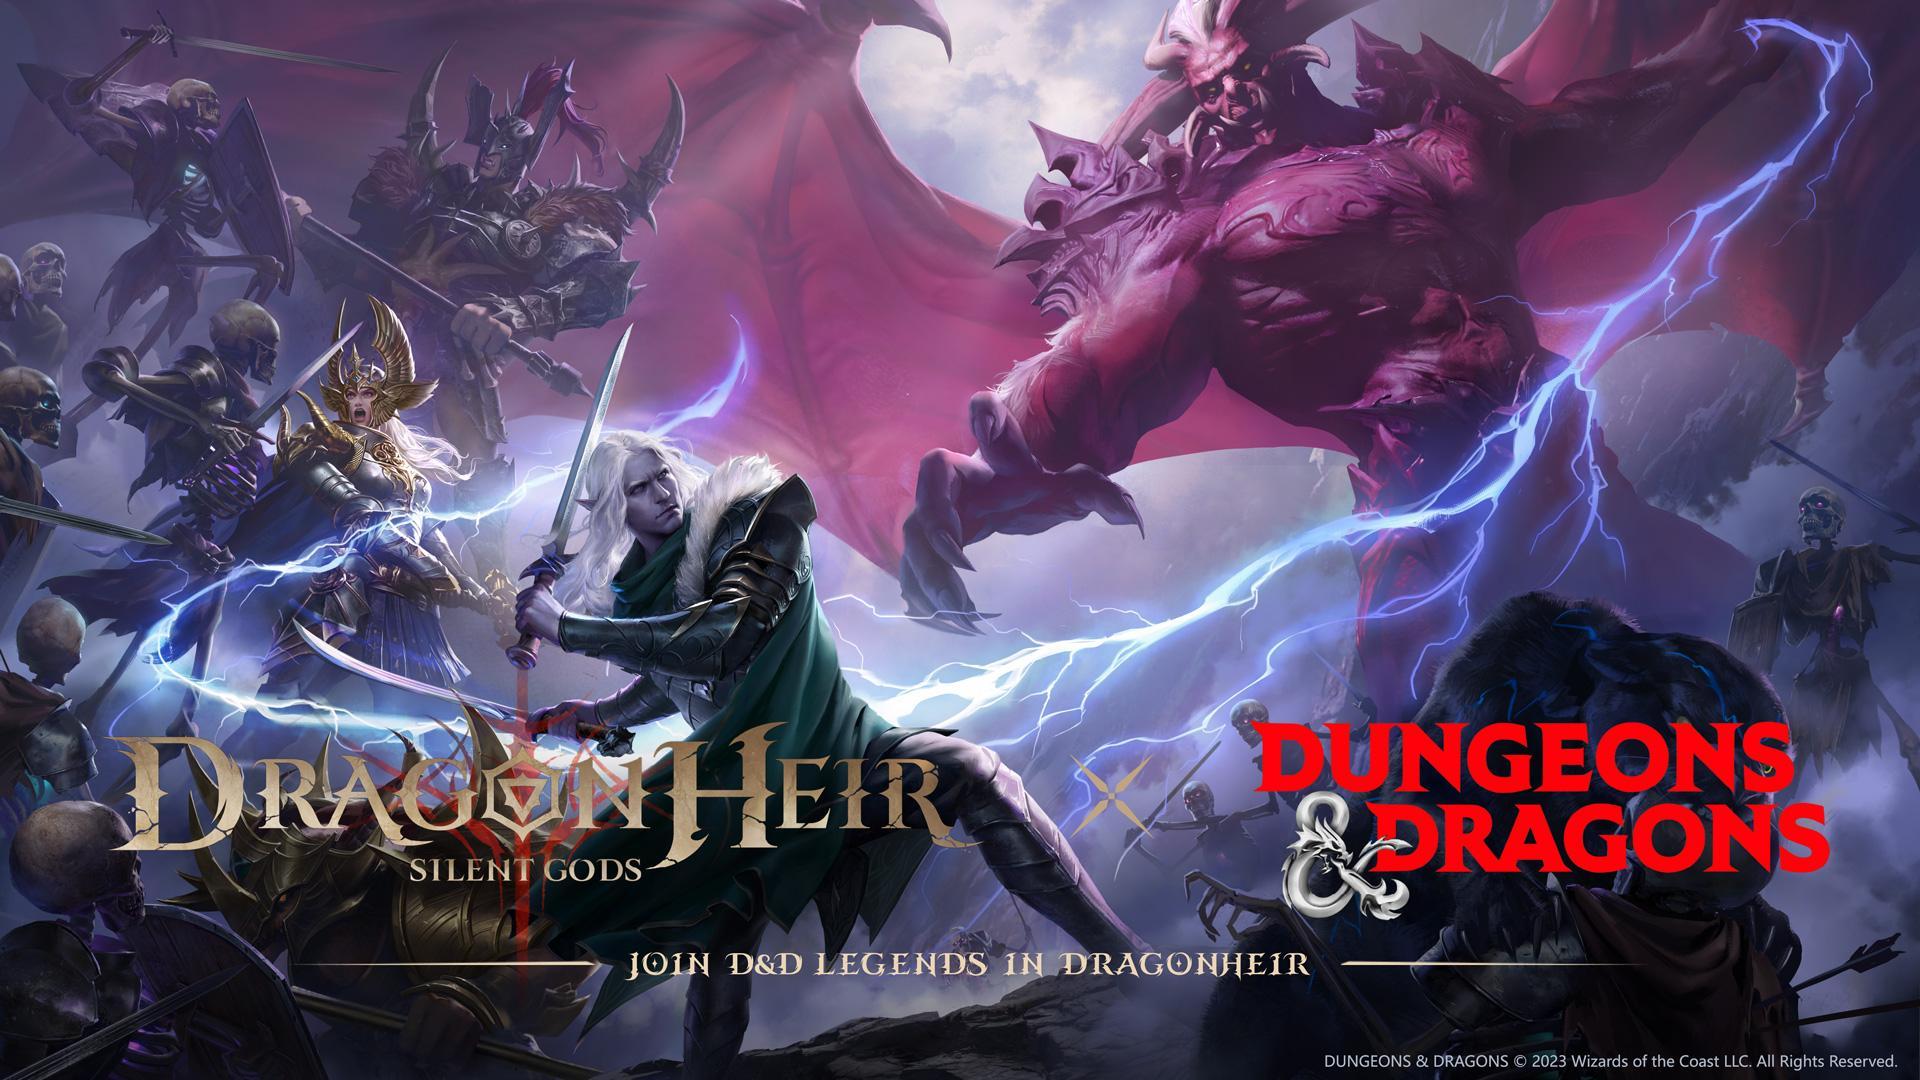 Dragonheir: Silent Gods collaborates with Dungeons & Dragons to expand its fantasy world.